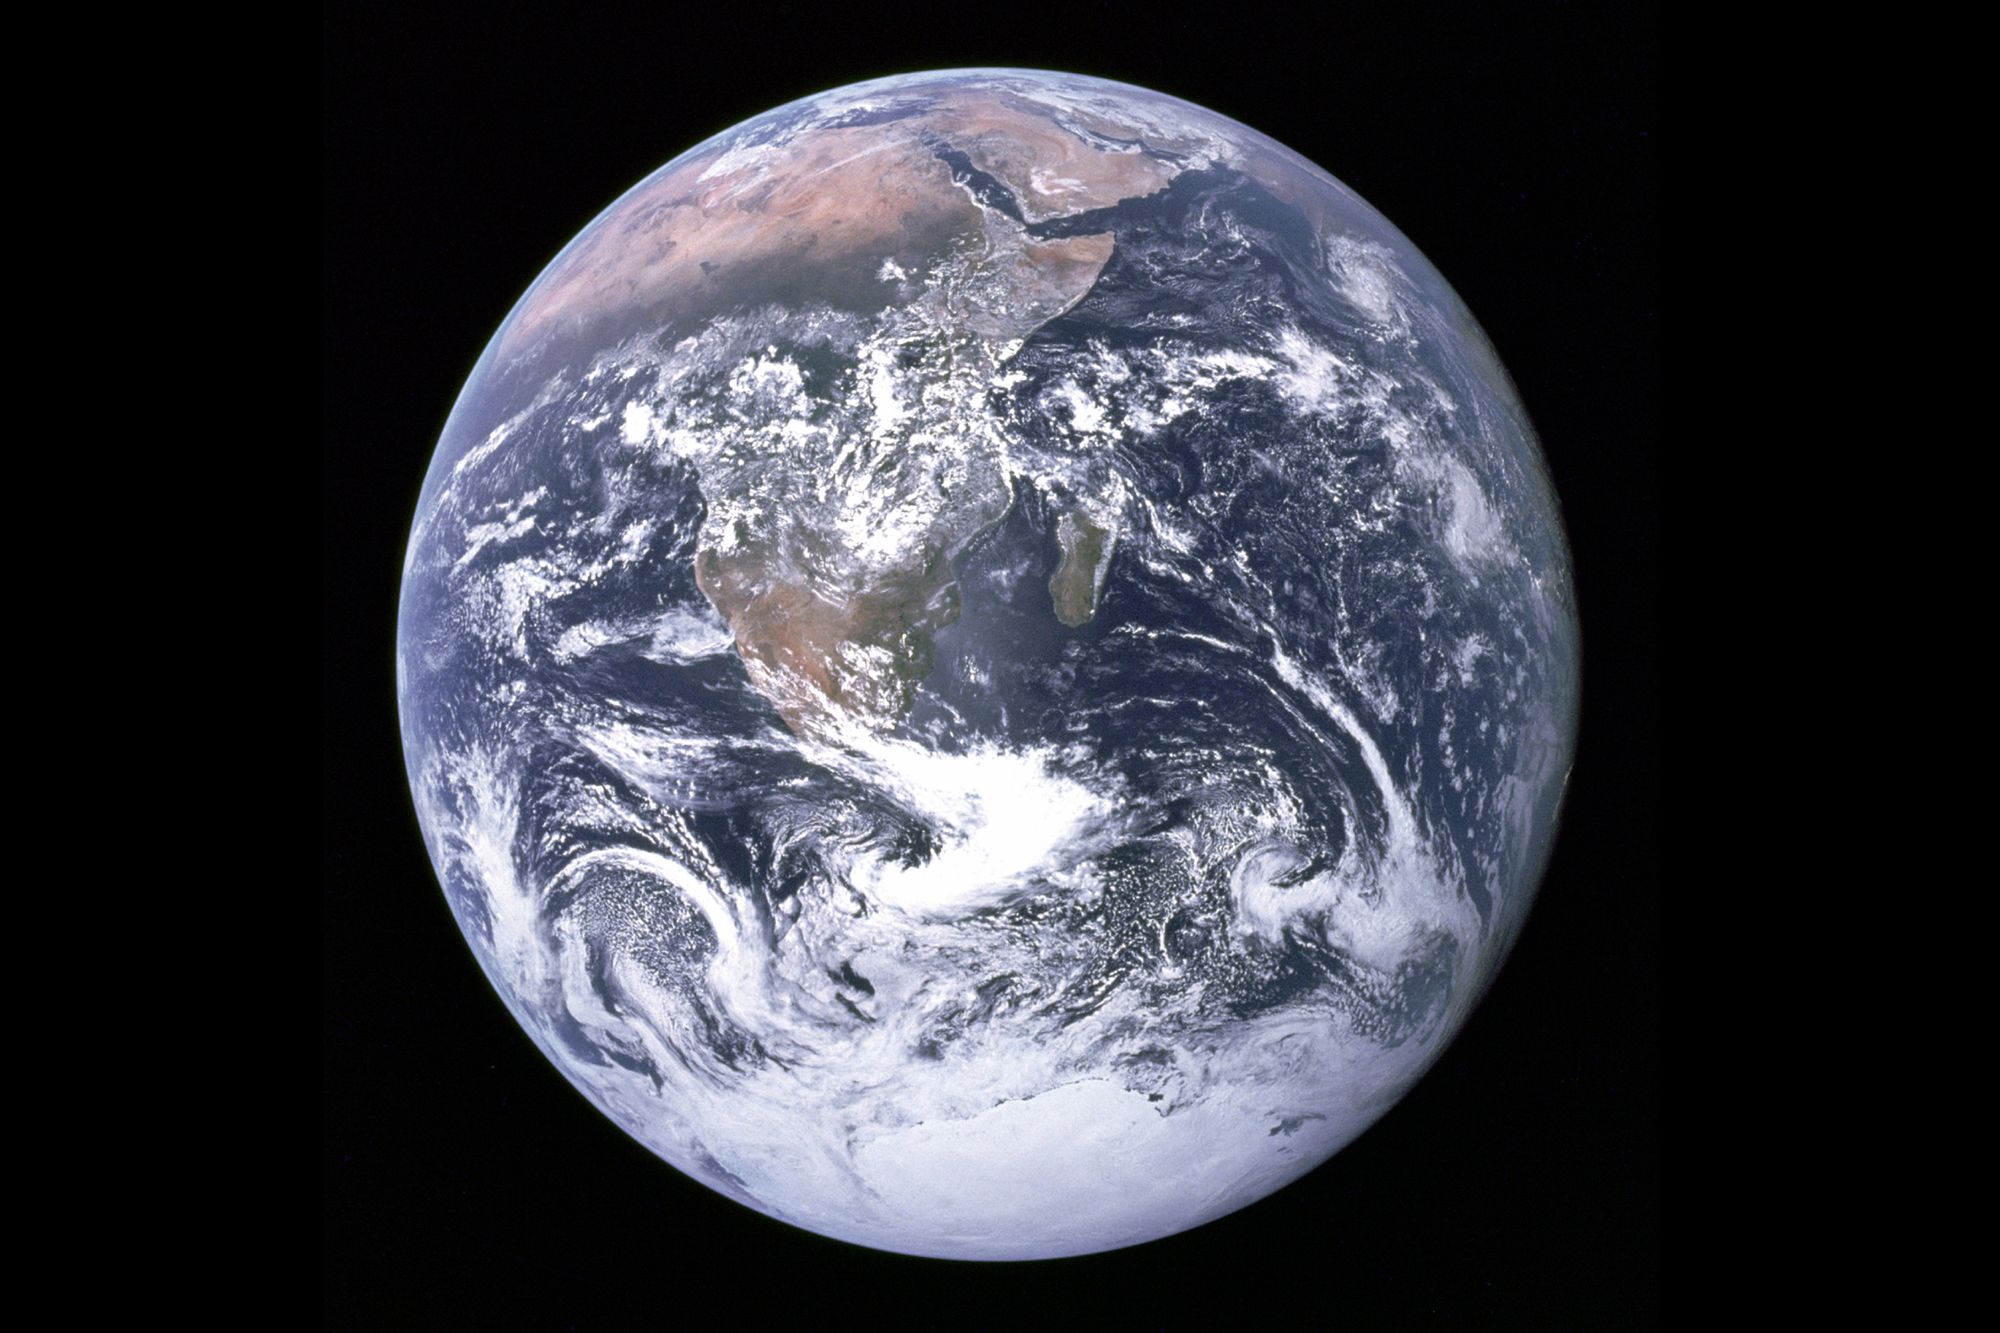 "The Blue Marble" is a famous photograph of the Earth taken taken in 1972 by the crew of the Apollo 17 spacecraft en route to the Moon. It shows Africa, Antarctica, and the Arabian Peninsula.